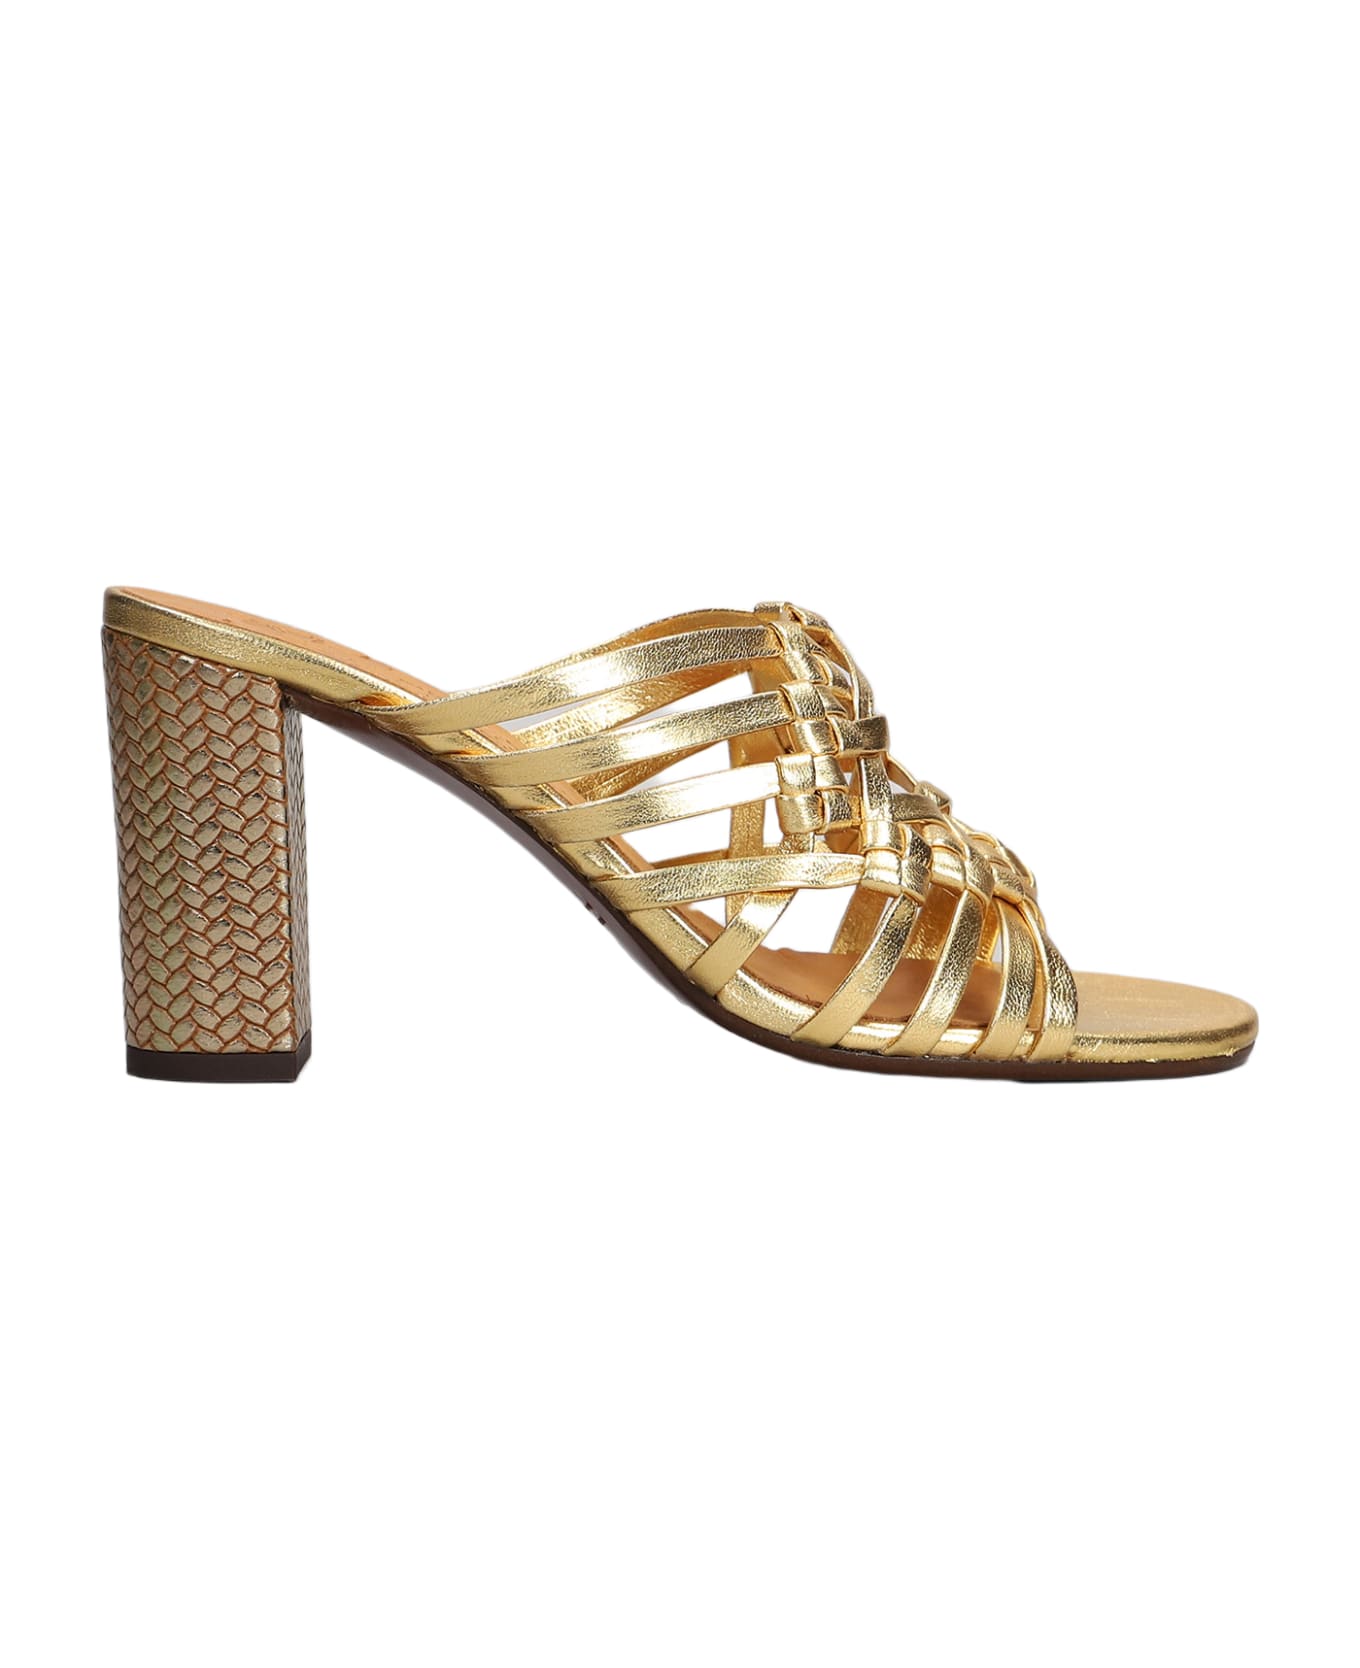 Chie Mihara Beijing Slipper-mule In Gold Leather - gold